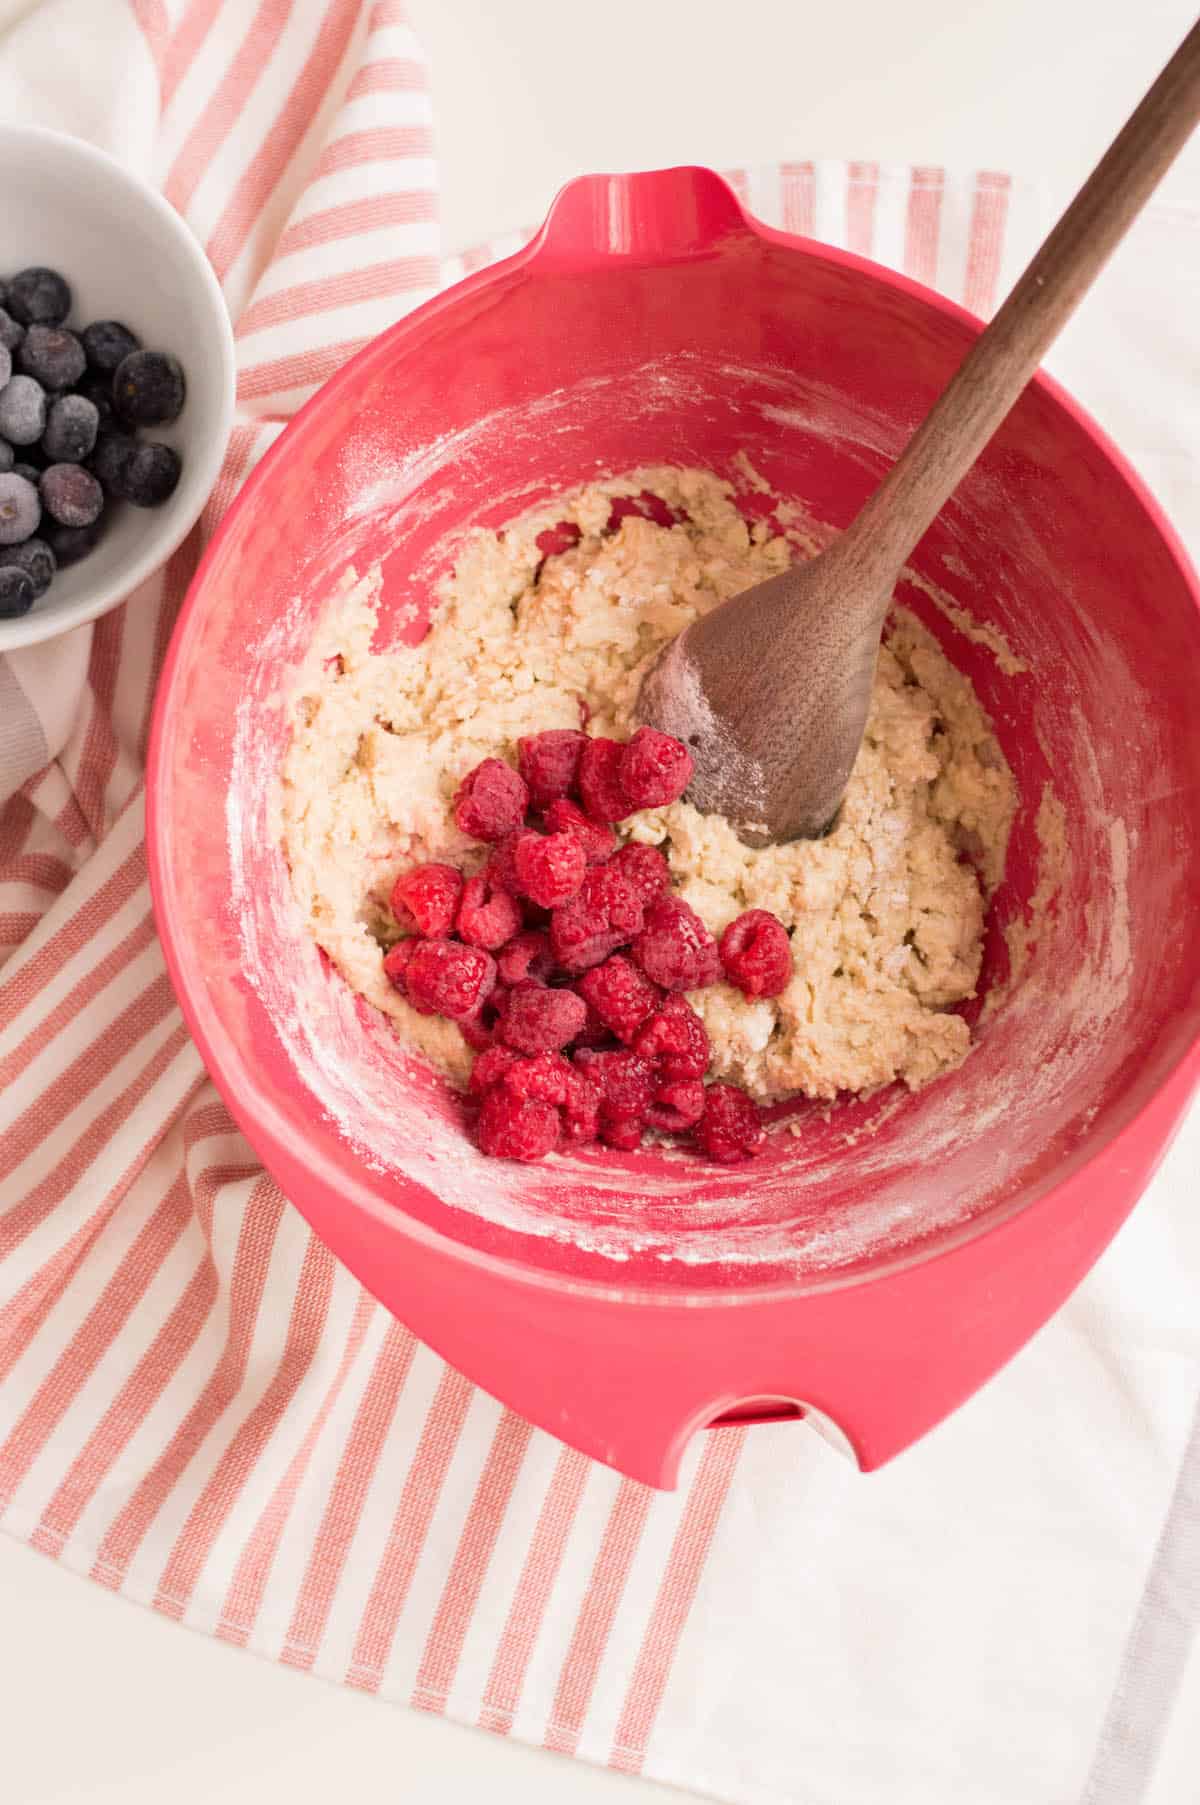 Berries in batter in red bowl on striped towel.